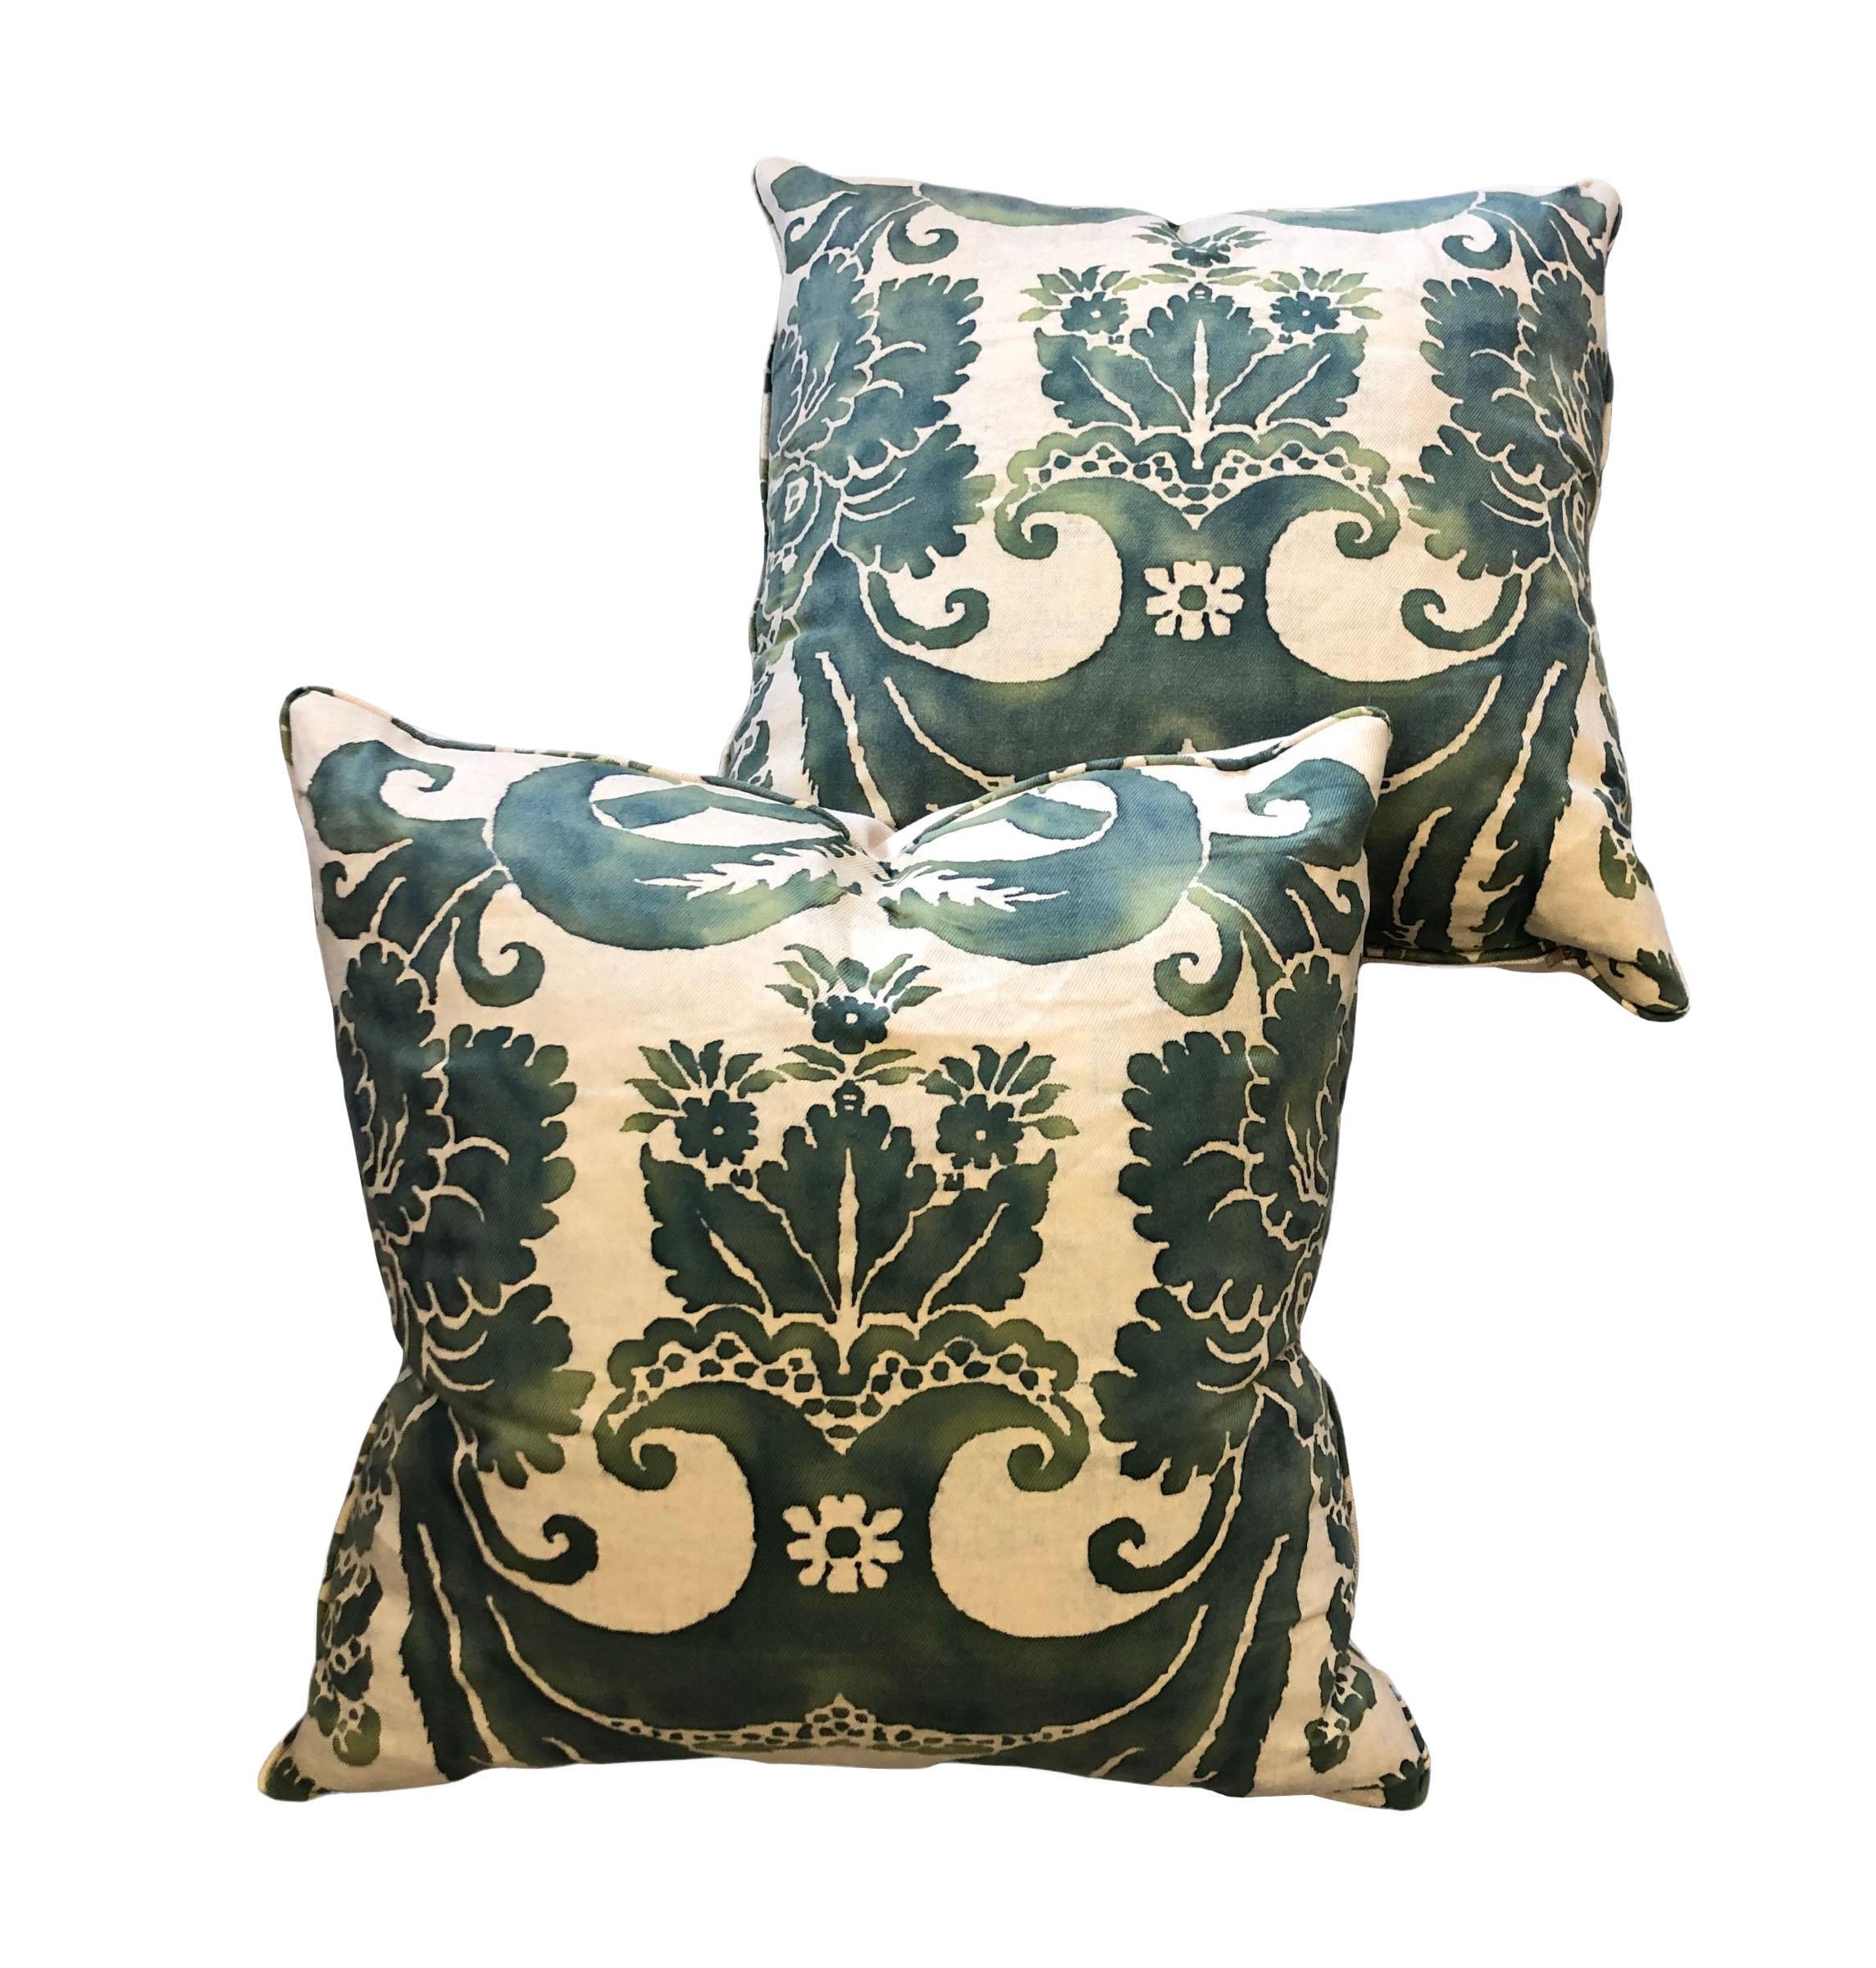 A fabulous pair of custom made pillows with Fortuny fabric from Italy, circa 1950s. Fabric on the back is linen and they have goose down filling.